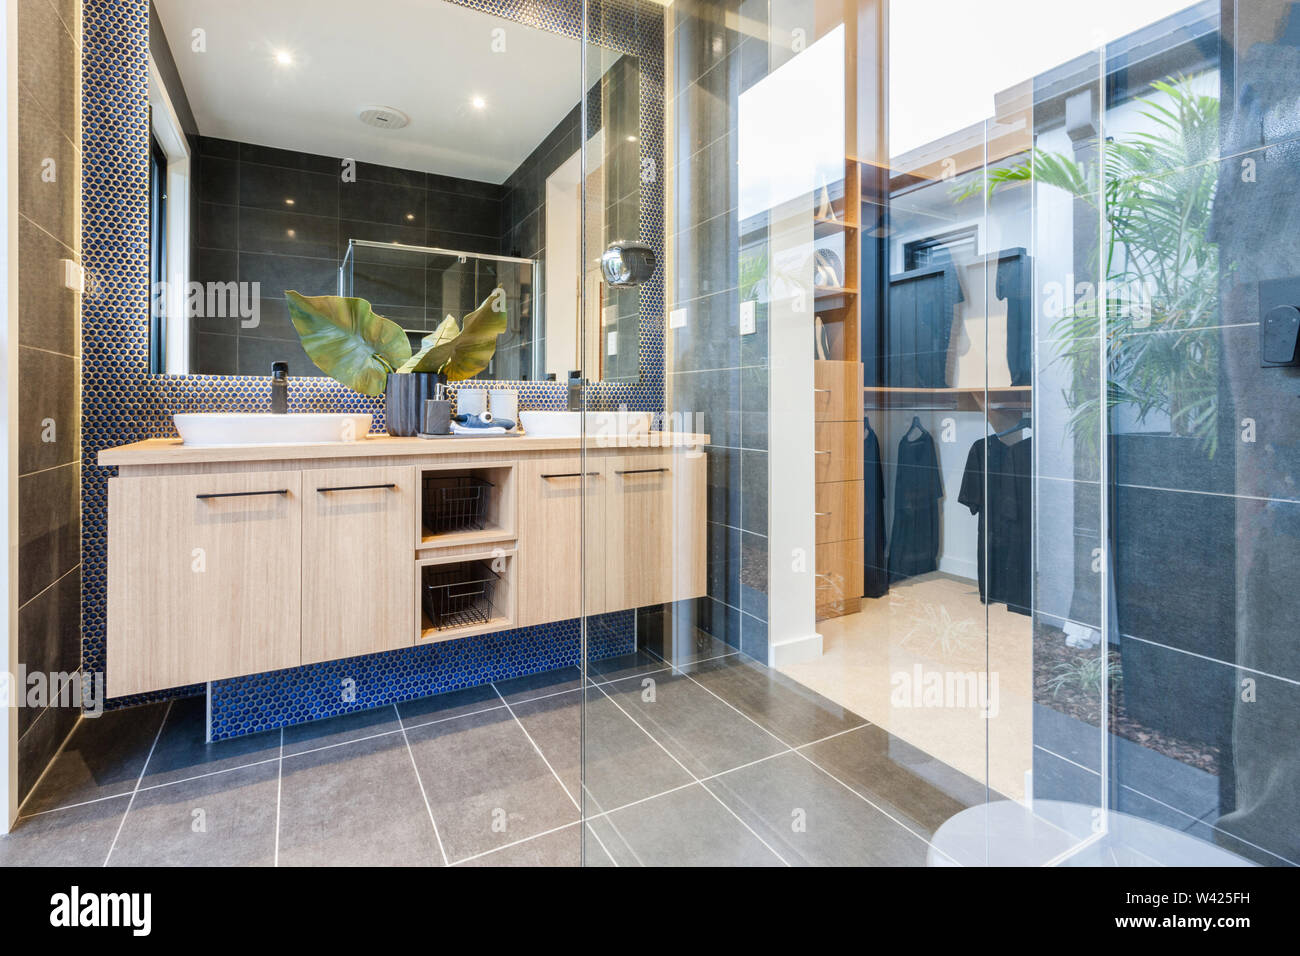 https://c8.alamy.com/comp/W425FH/stylish-washroom-with-a-dual-sink-cabinet-and-a-glass-partition-leading-to-a-walk-in-wardrobe-W425FH.jpg